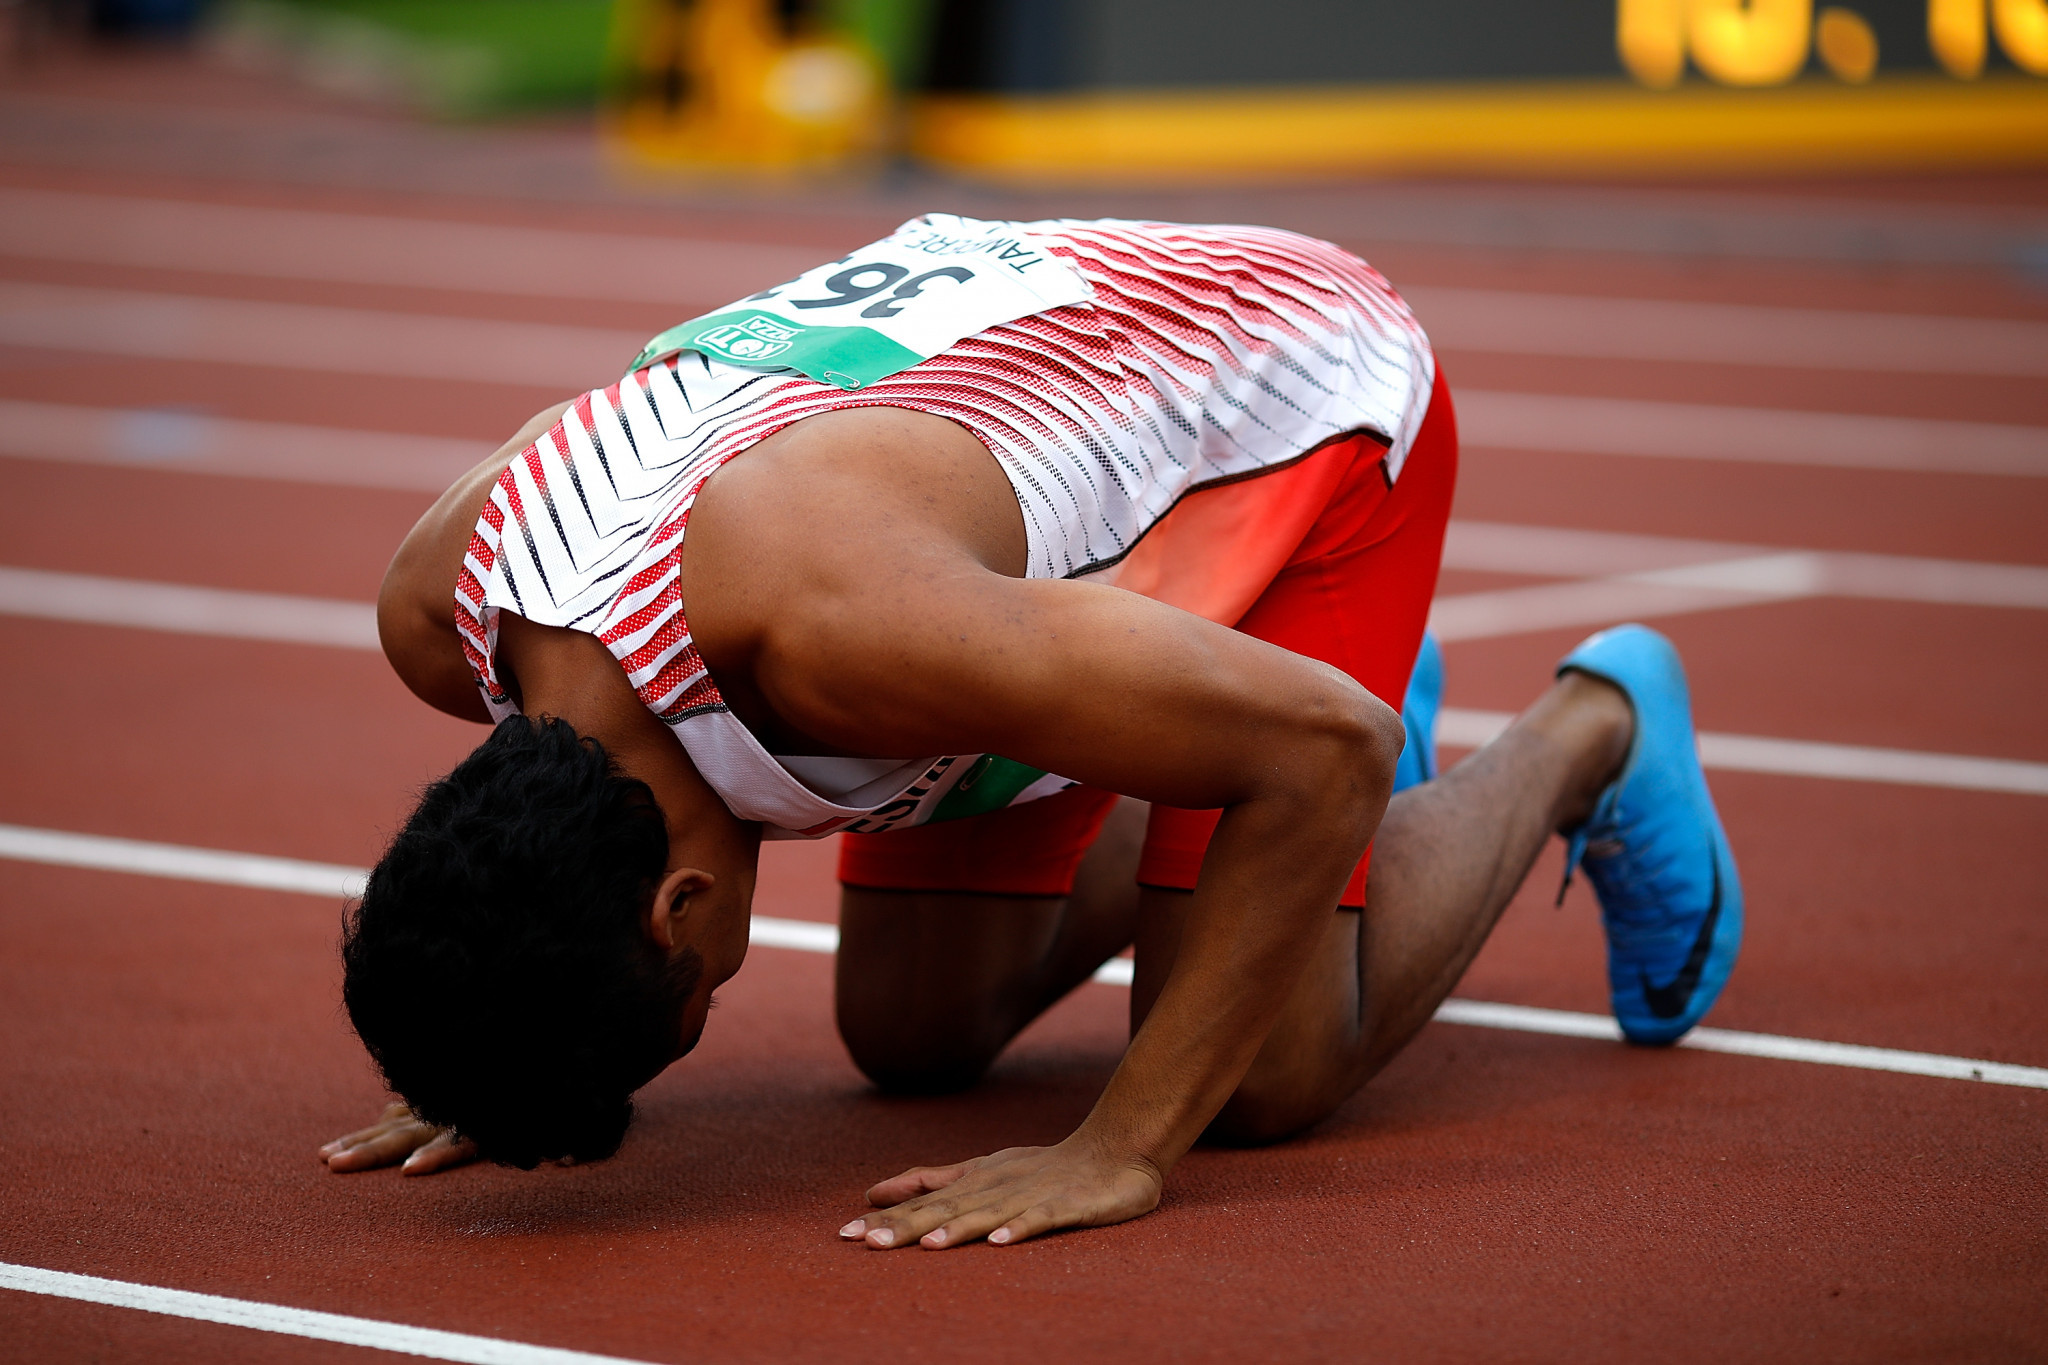 Shock Indonesian 100m gold as Japan scoop double at IAAF World Under-20 Championships